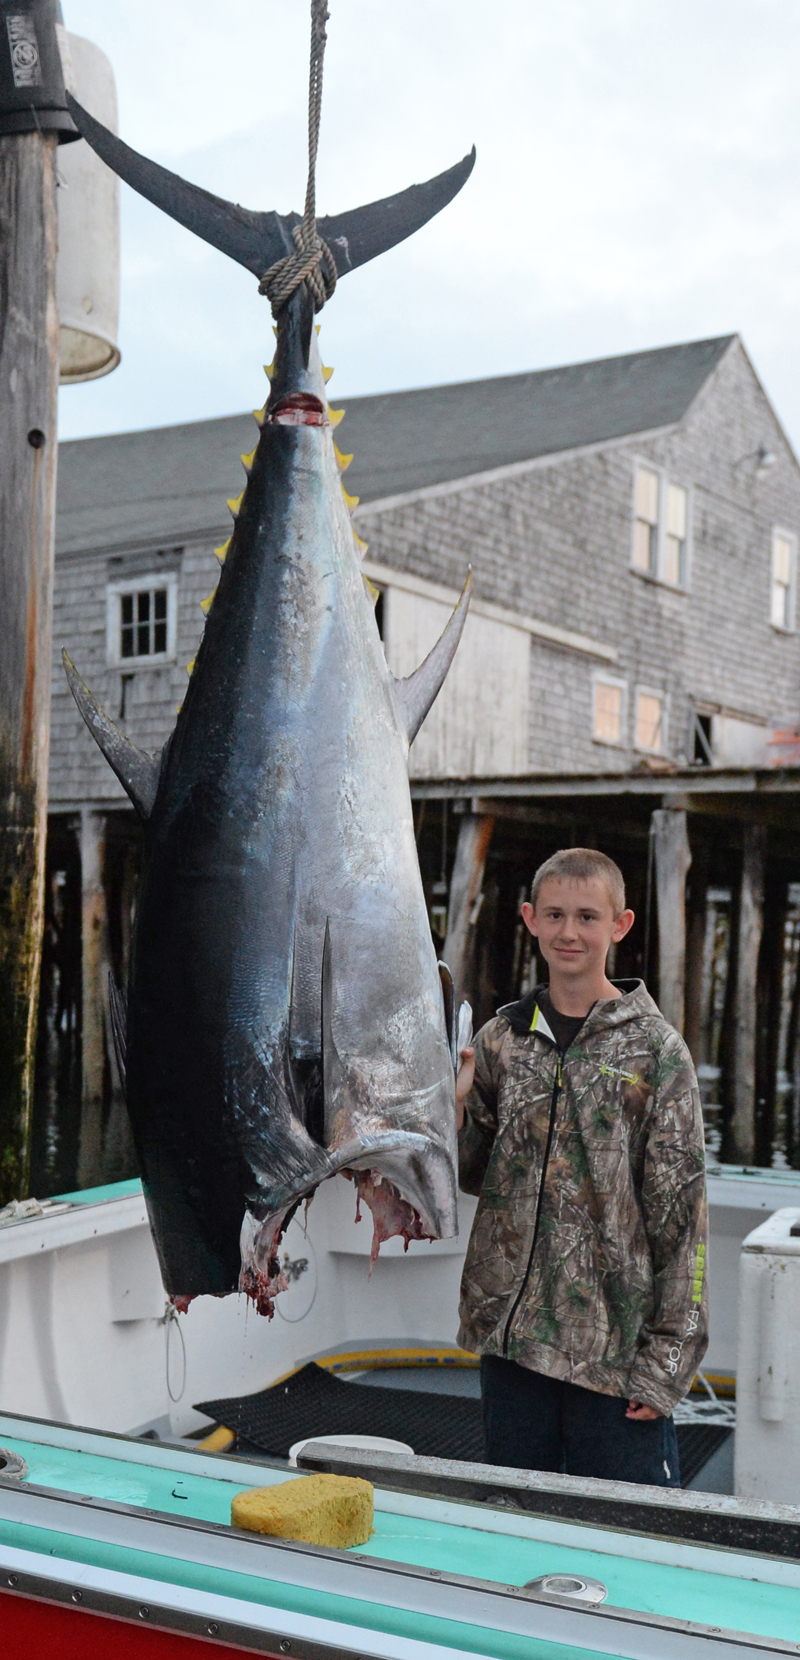 Myles Wotton with the tuna he caught Monday aboard his father's fishing boat, the Red Lady. The fish dressed out at 381 pounds. (Paula Roberts photo)